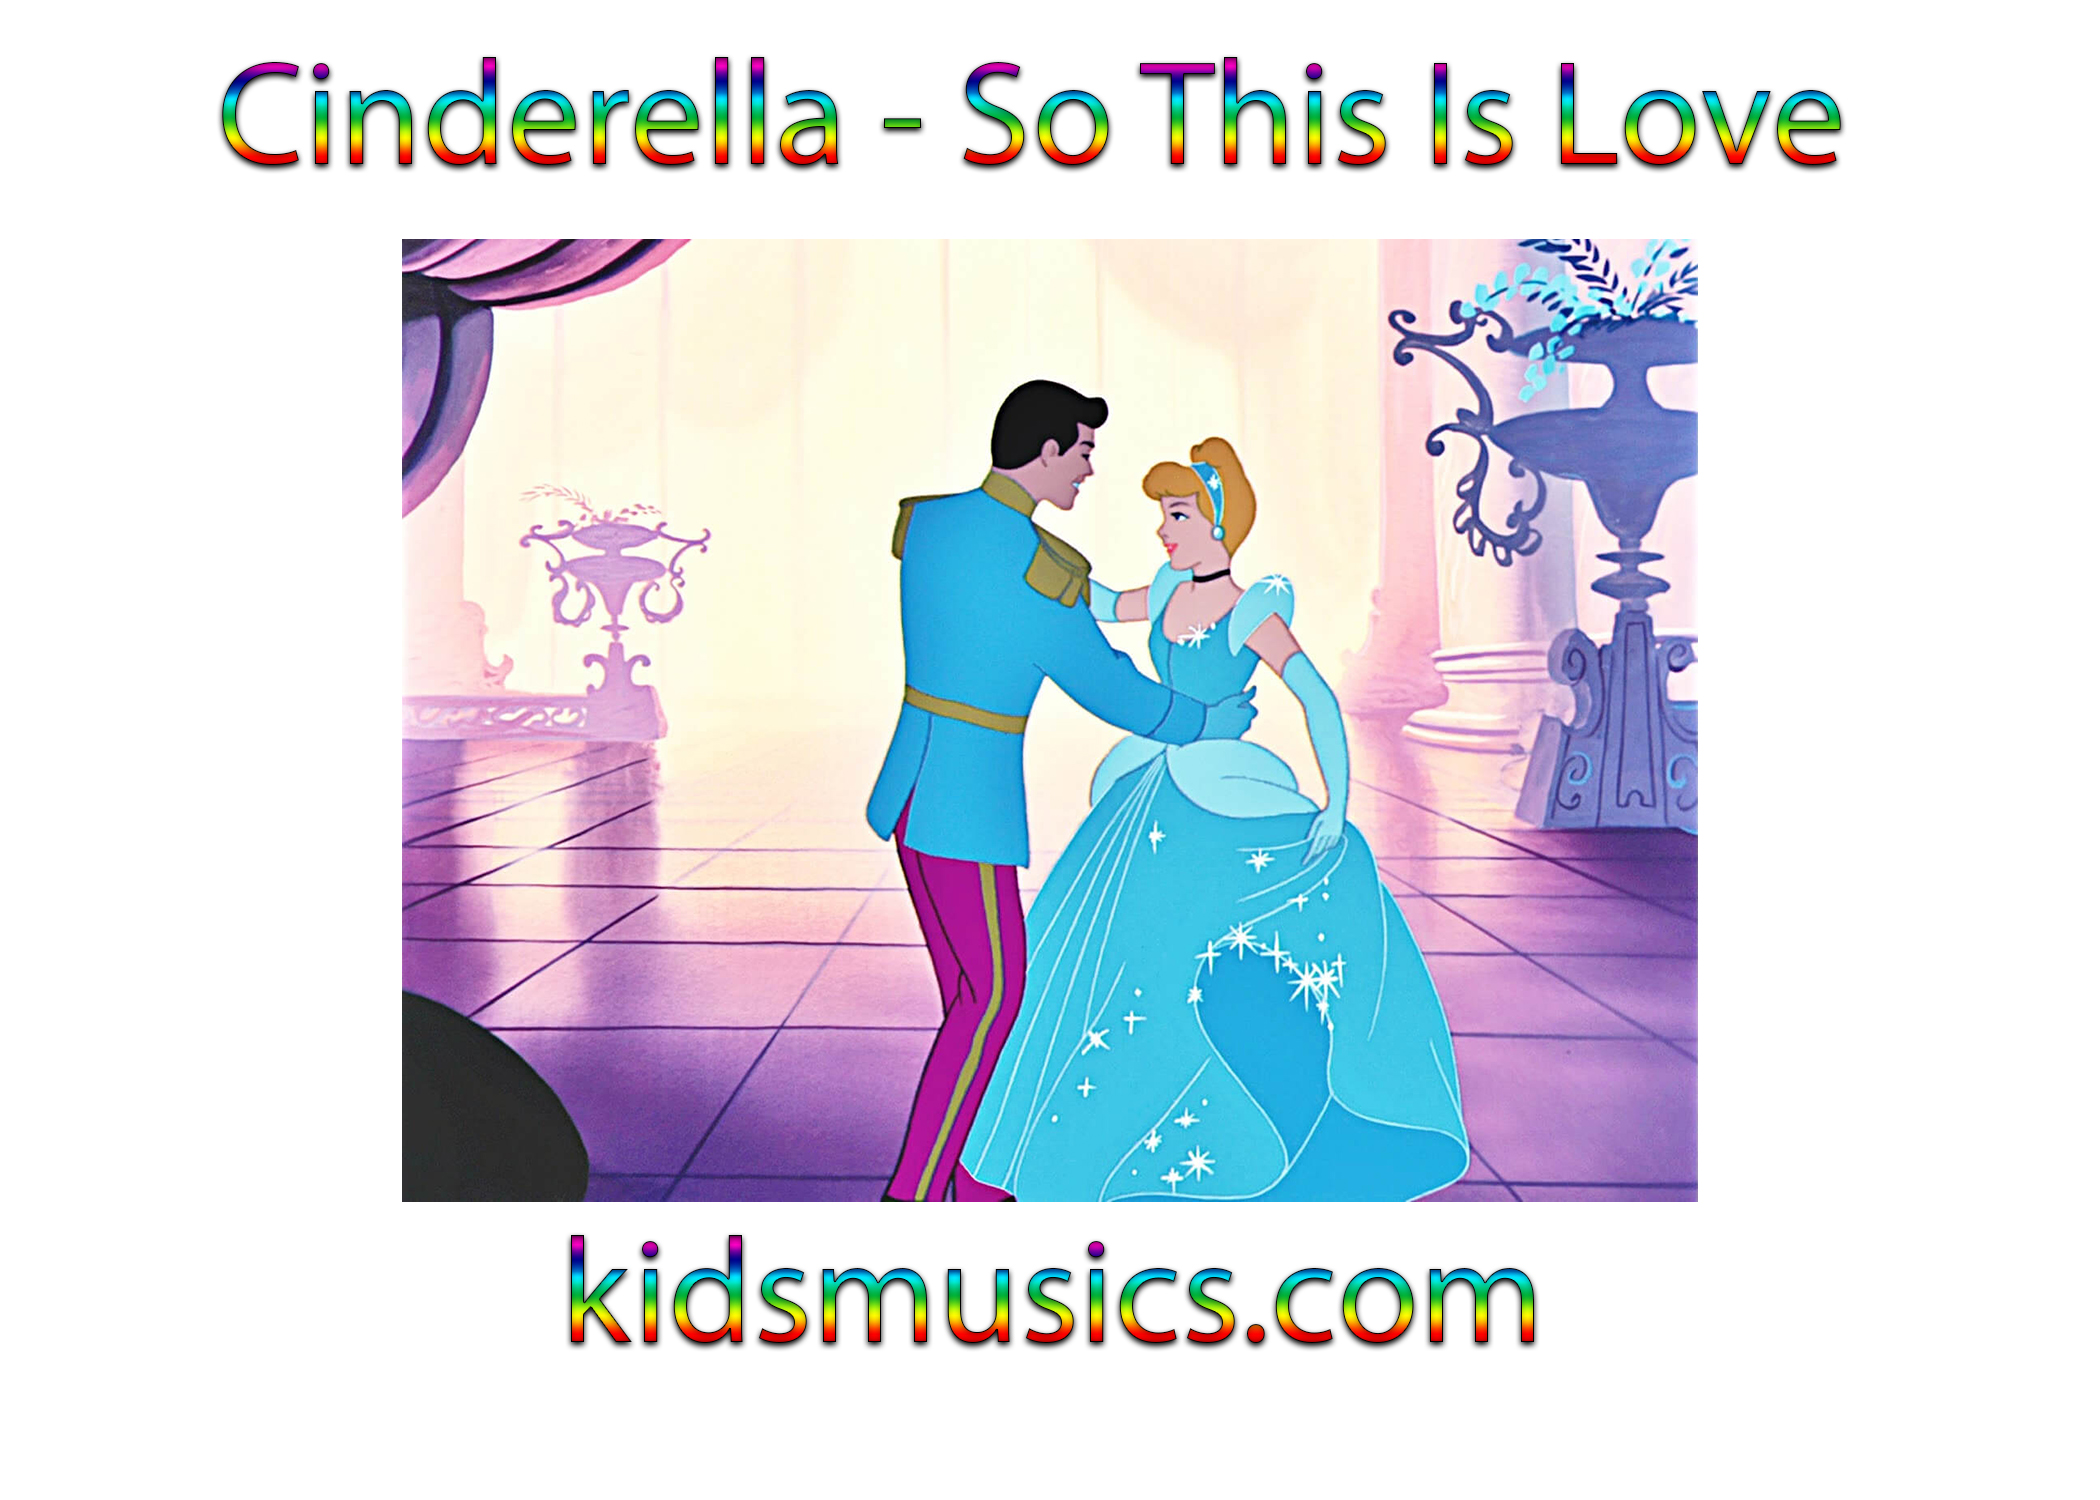 Kidsmusics Download Cinderella So This Is Love Free Mp3 Zip Archive Flac